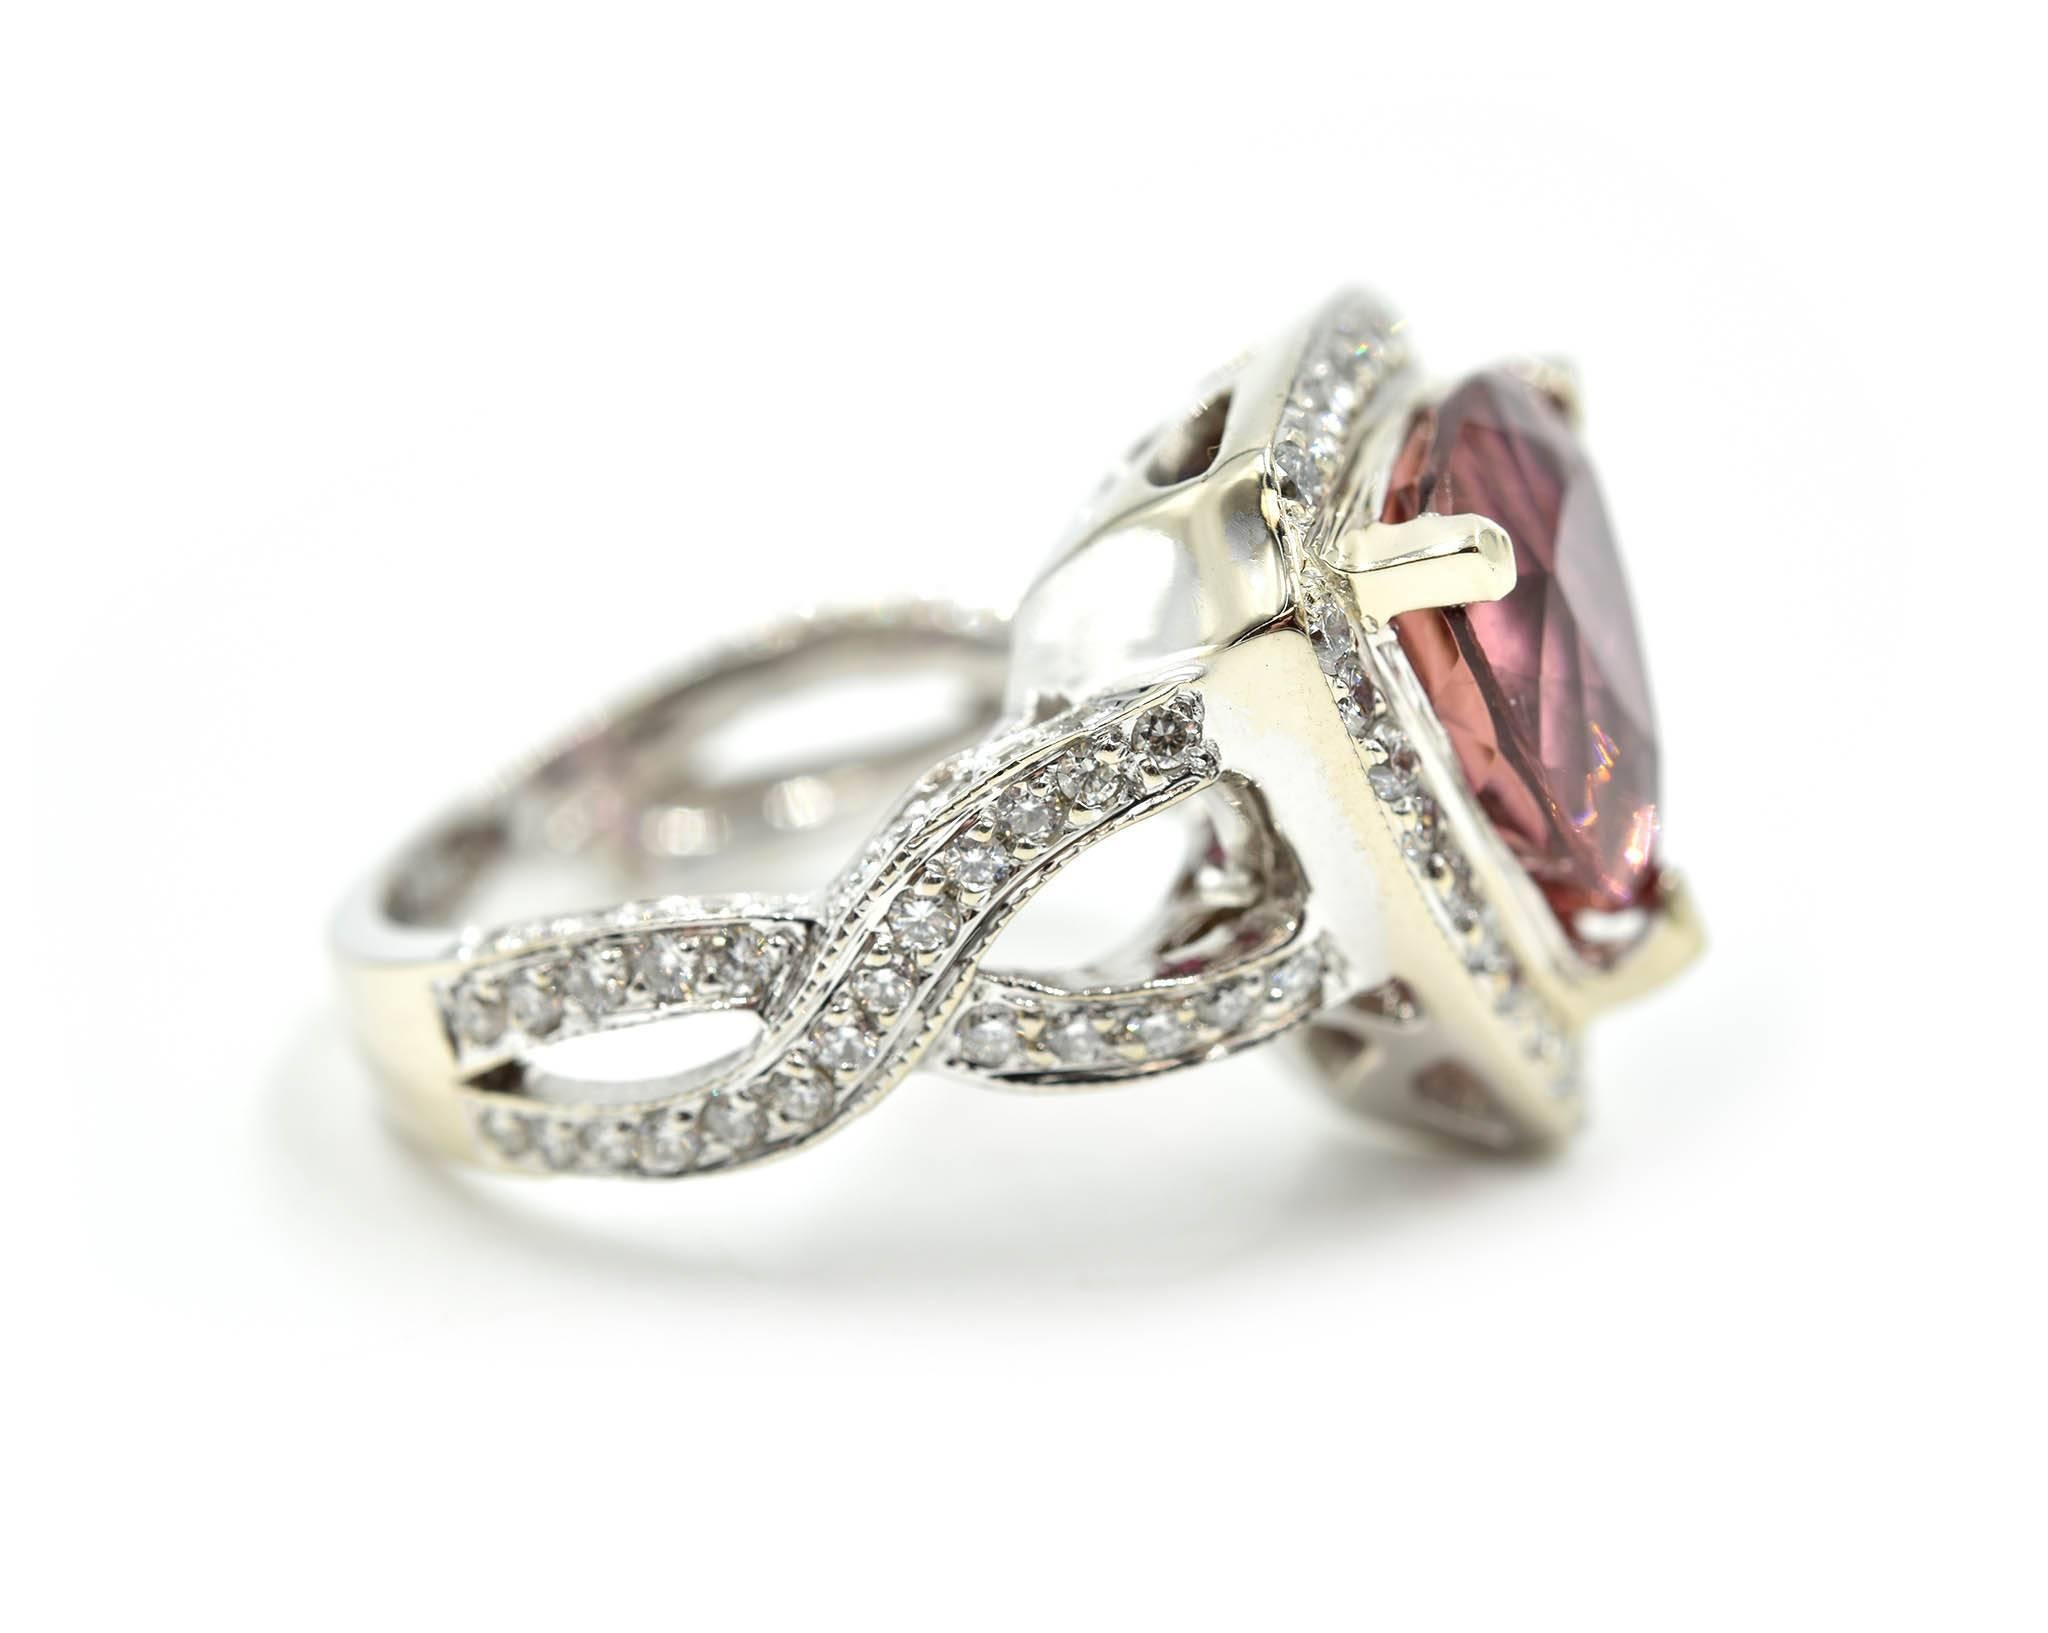 Designer: custom design
Material: 18k white gold
Center Stone: trilliant cut 4.50 carat pink tourmaline 
Diamonds: round cut 1.44 carat total weight
Color: G-H
Clarity: VS
Ring Size: 7
Weight: 14.28 grams
